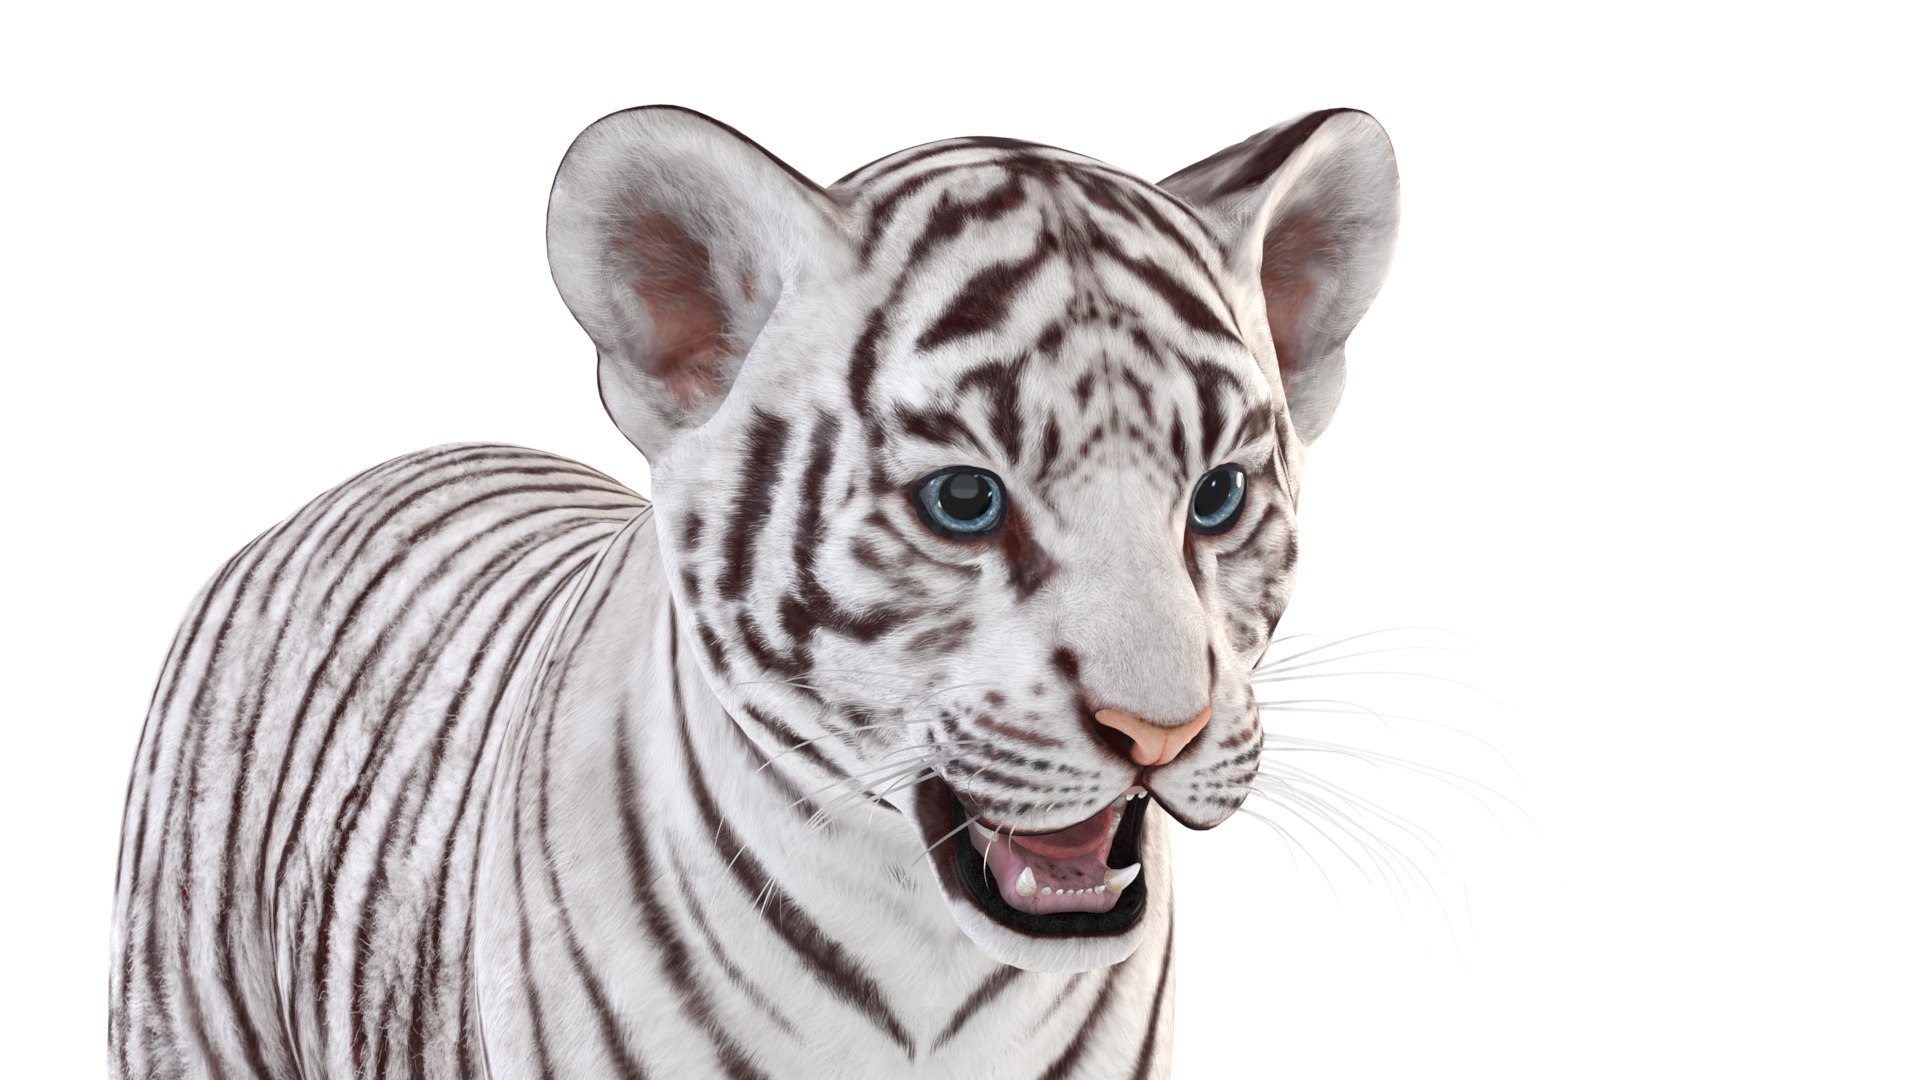 7,791 Cute White Tiger Cub Images, Stock Photos, 3D objects, & Vectors